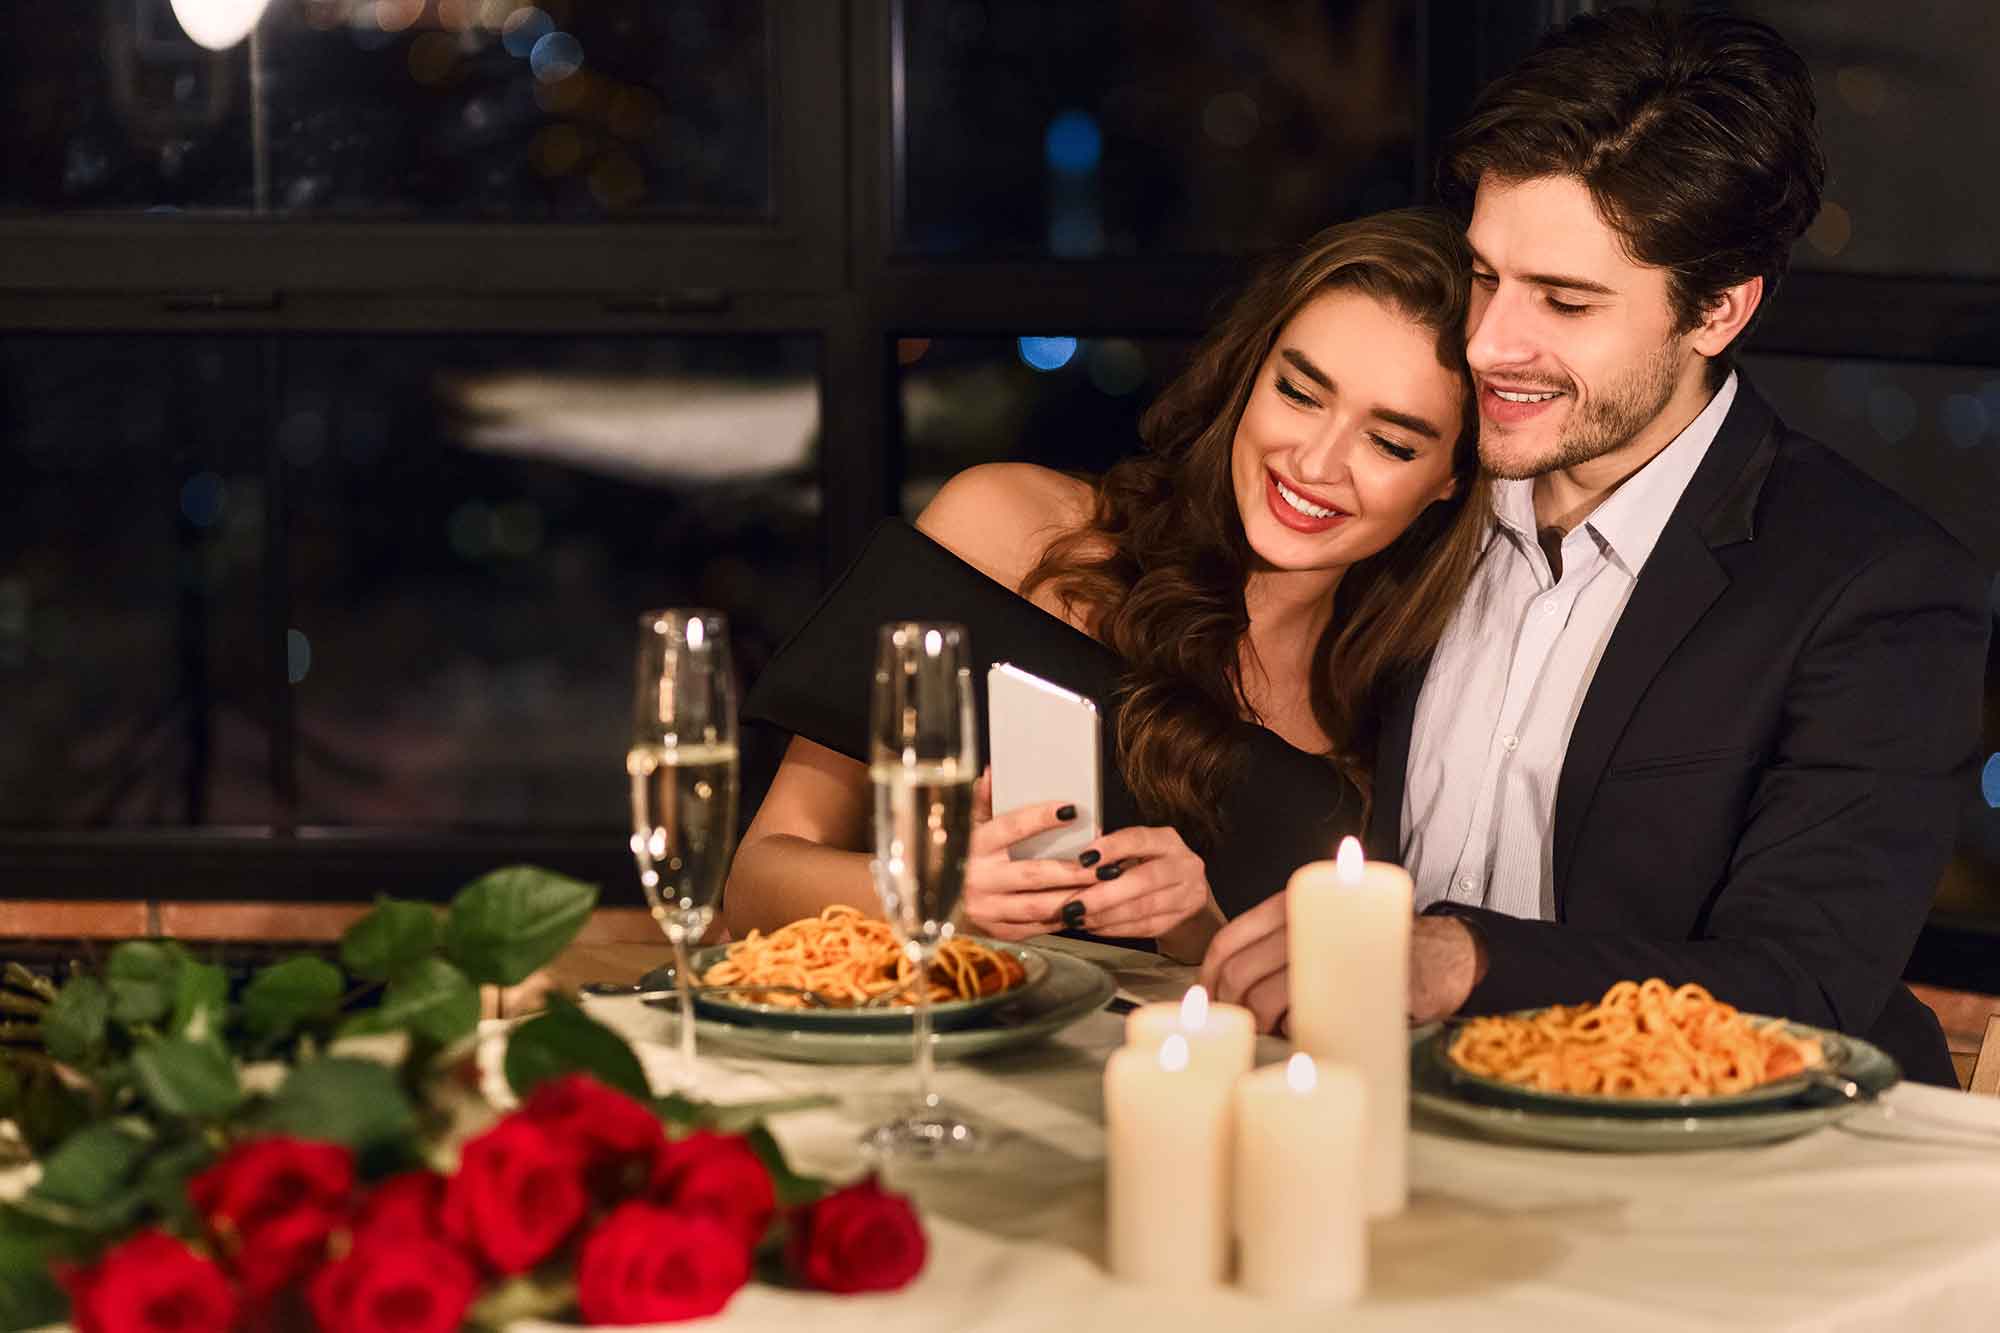 Six Ideas for Valentine’s Day Restaurant Promotions